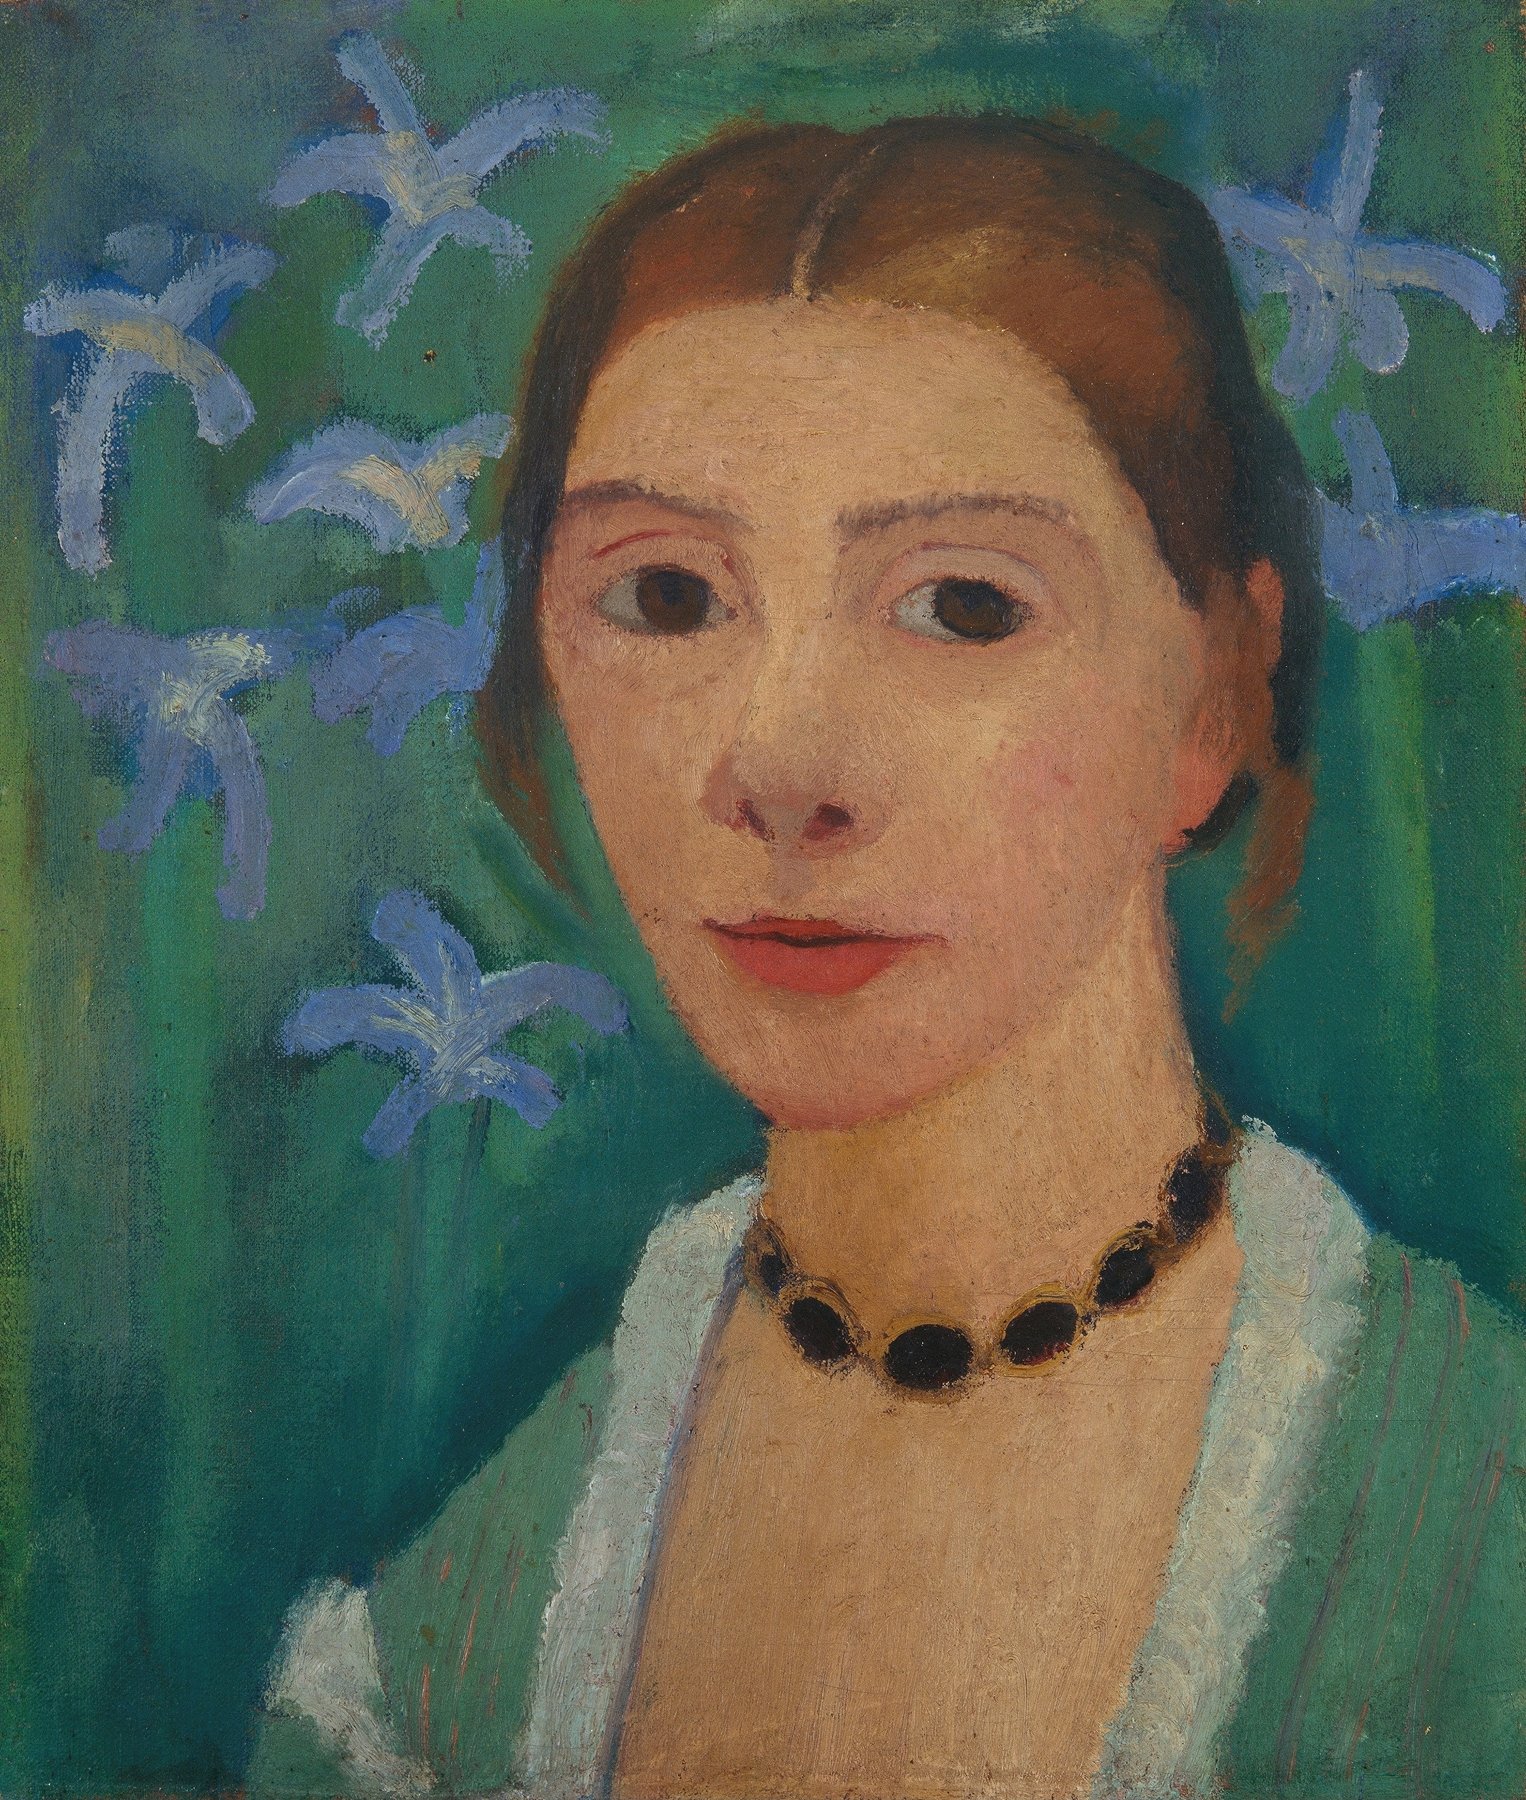 Self-portrait in front of a green background with a blue iris (between 1900 and 1907)